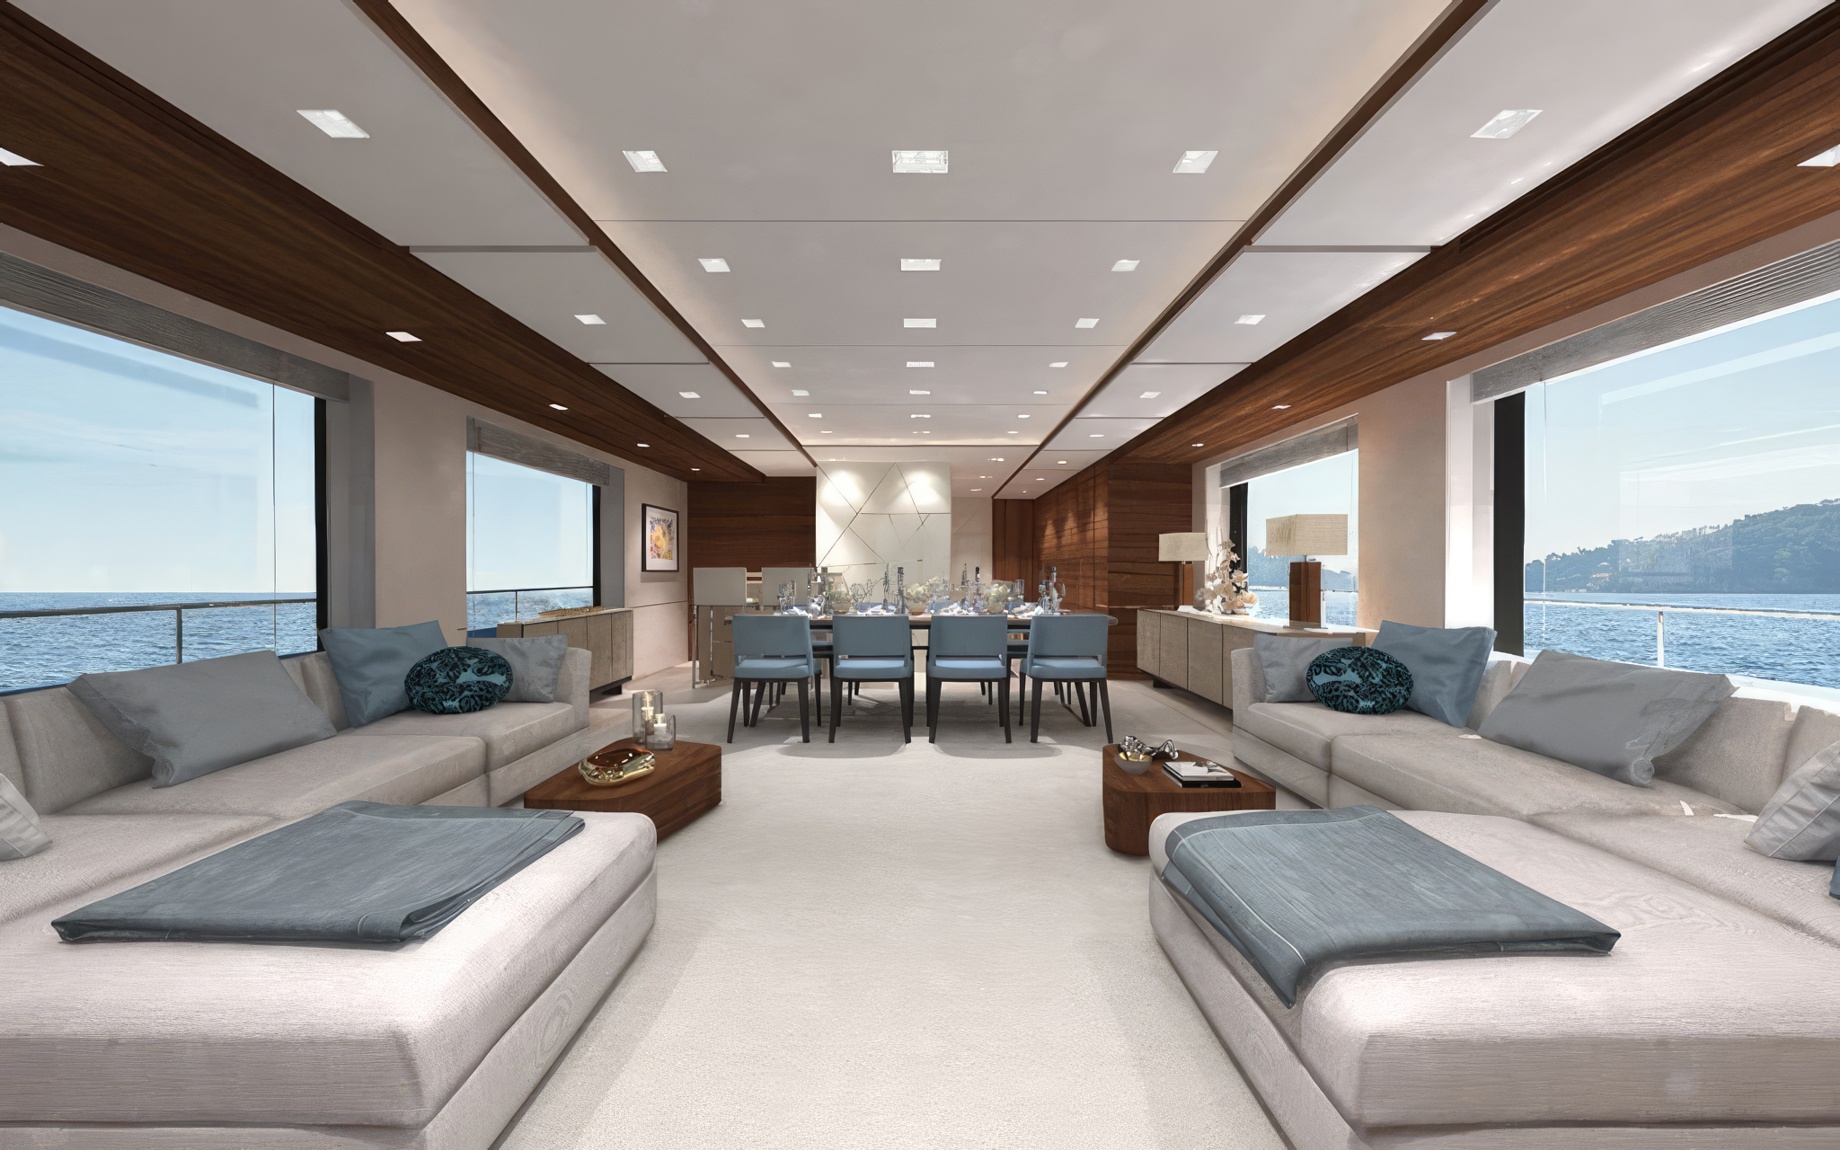 The Adventure Series – A Line of Explorer Yachts For Sale Conceived by Lynx Yachts to Navigate the World – Interior Space